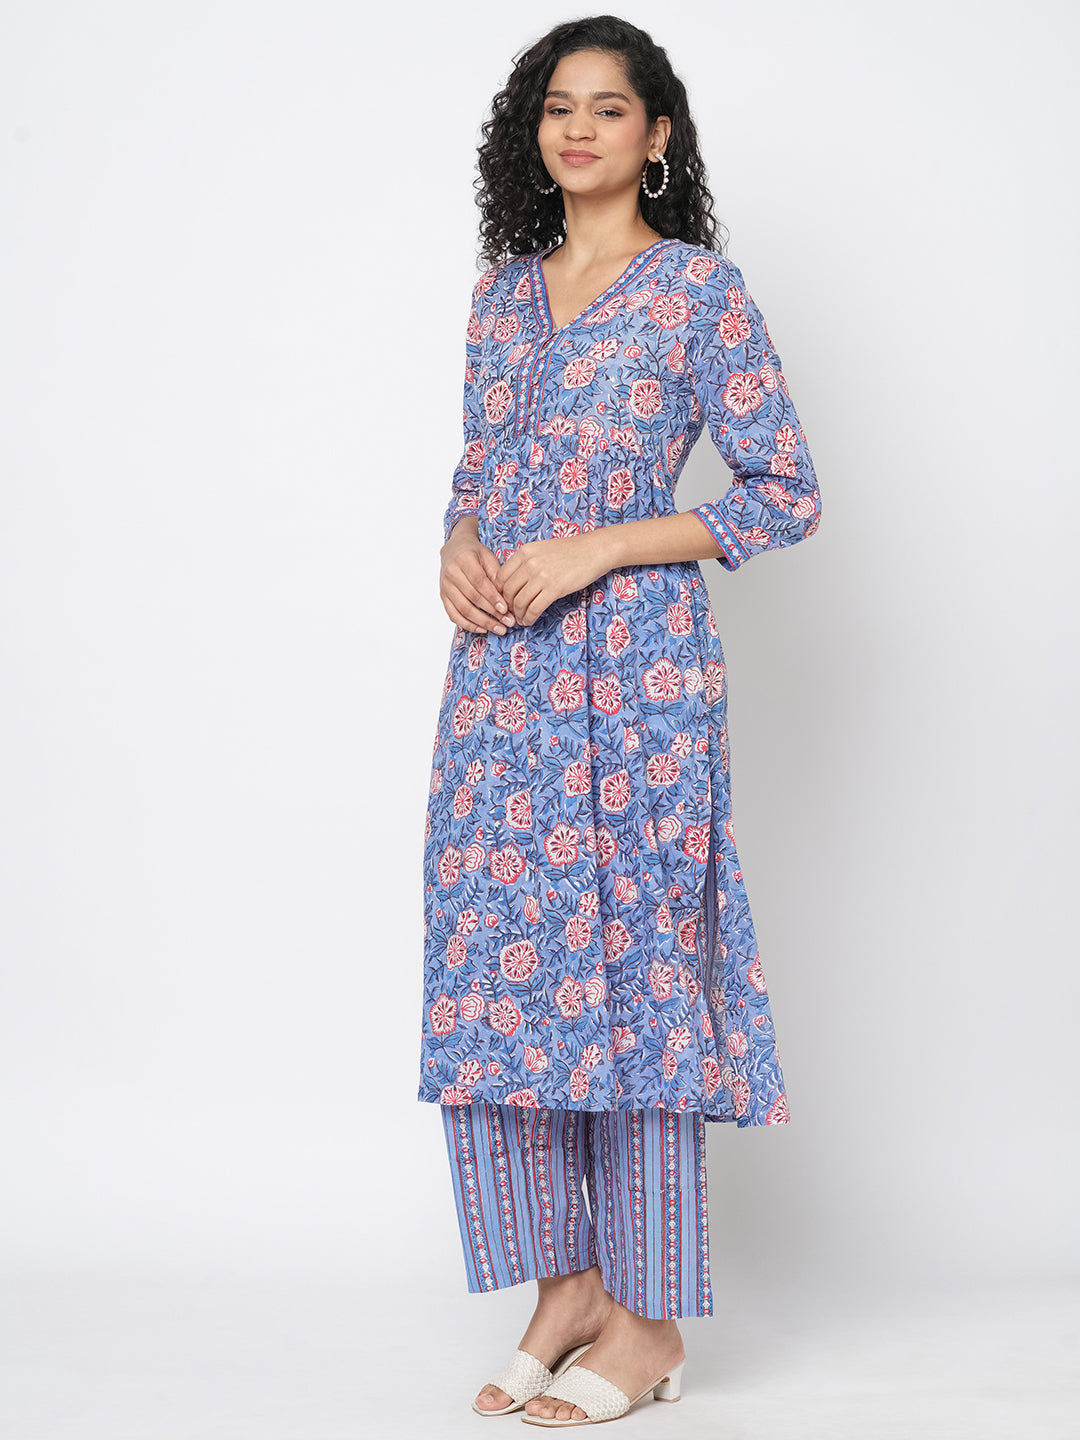 Little Muffet | Shop Online For Kids Ethnic Wear, Indian Clothes & Party  Dresses